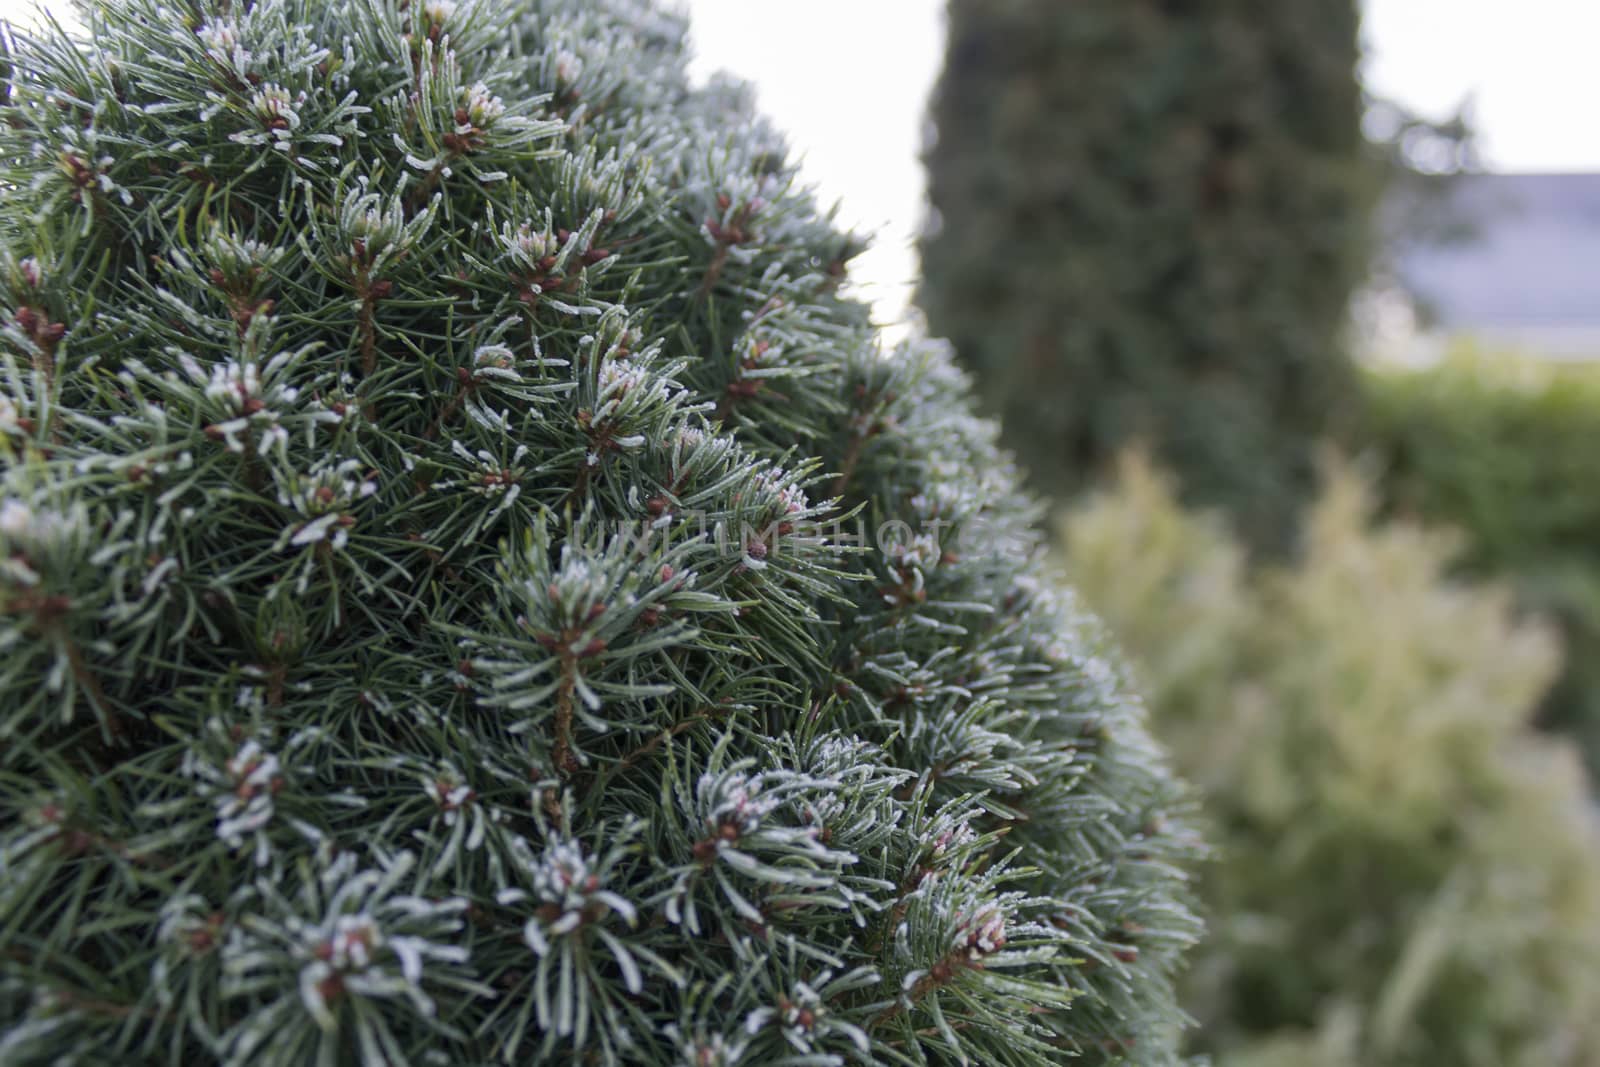 Needles of frosty green conifer tree, covered with ice.